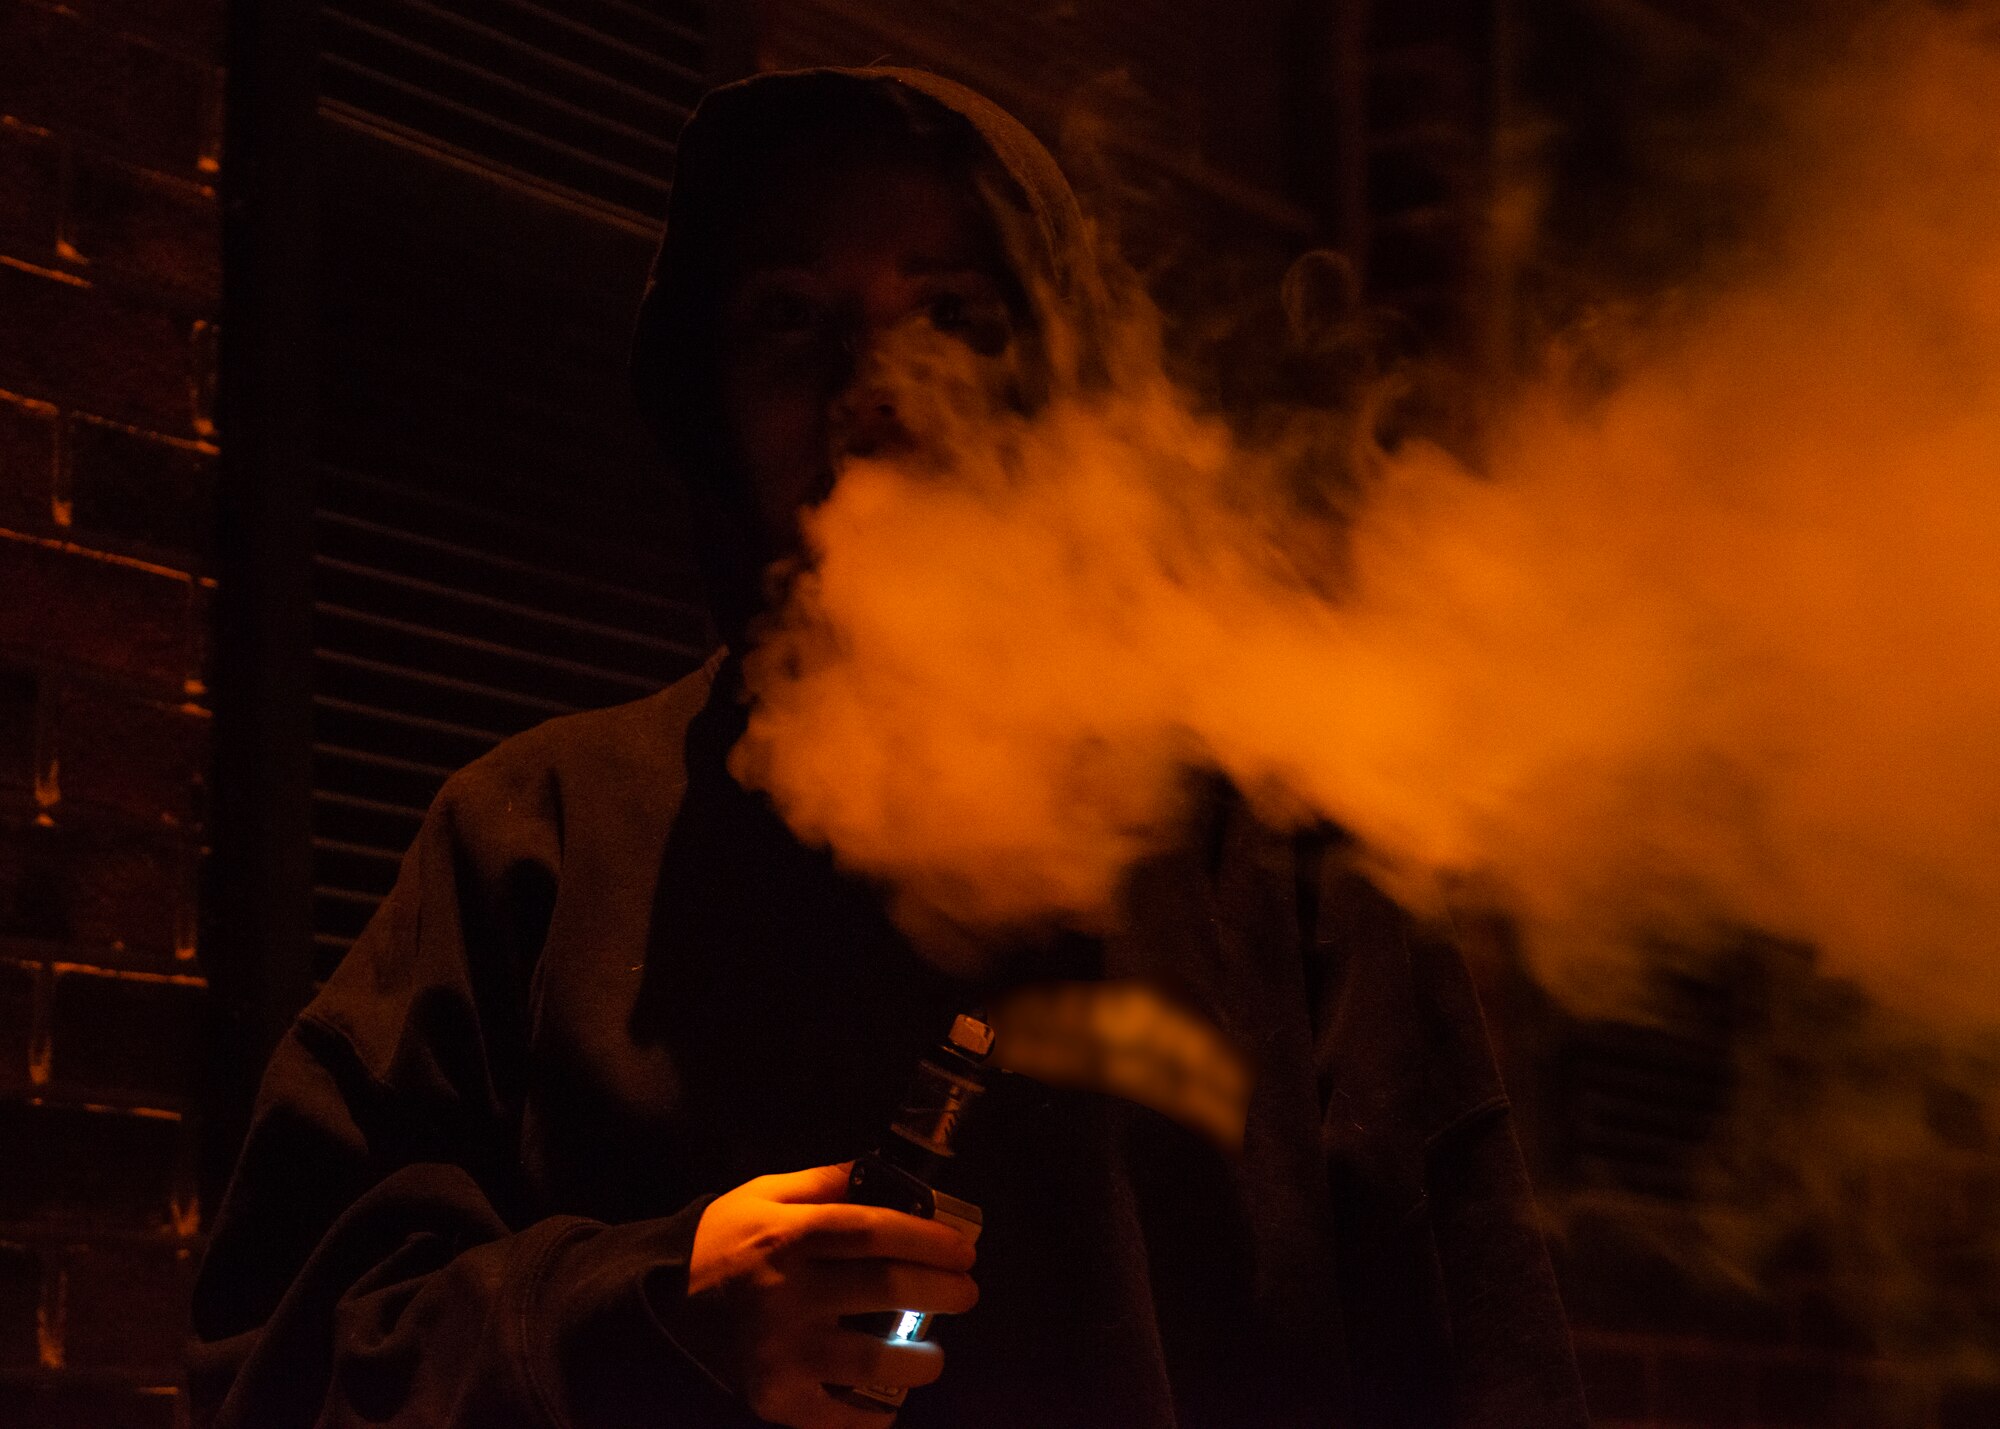 An Airman blows vapor into the air at Warrensburg, MO, Oct. 2, 2019. According to the Centers for Disease Control and Prevention, e-cigarettes produce an aerosol by heating a liquid mixture of nicotine, flavorings or other chemicals which users then inhale. Members should learn the risks they take when choosing to vape and they’re encouraged to use the 509th Medical Group’s resources for quitting smoking or vaping. (U.S. Air Force photo by Staff Sgt. Sadie Colbert)